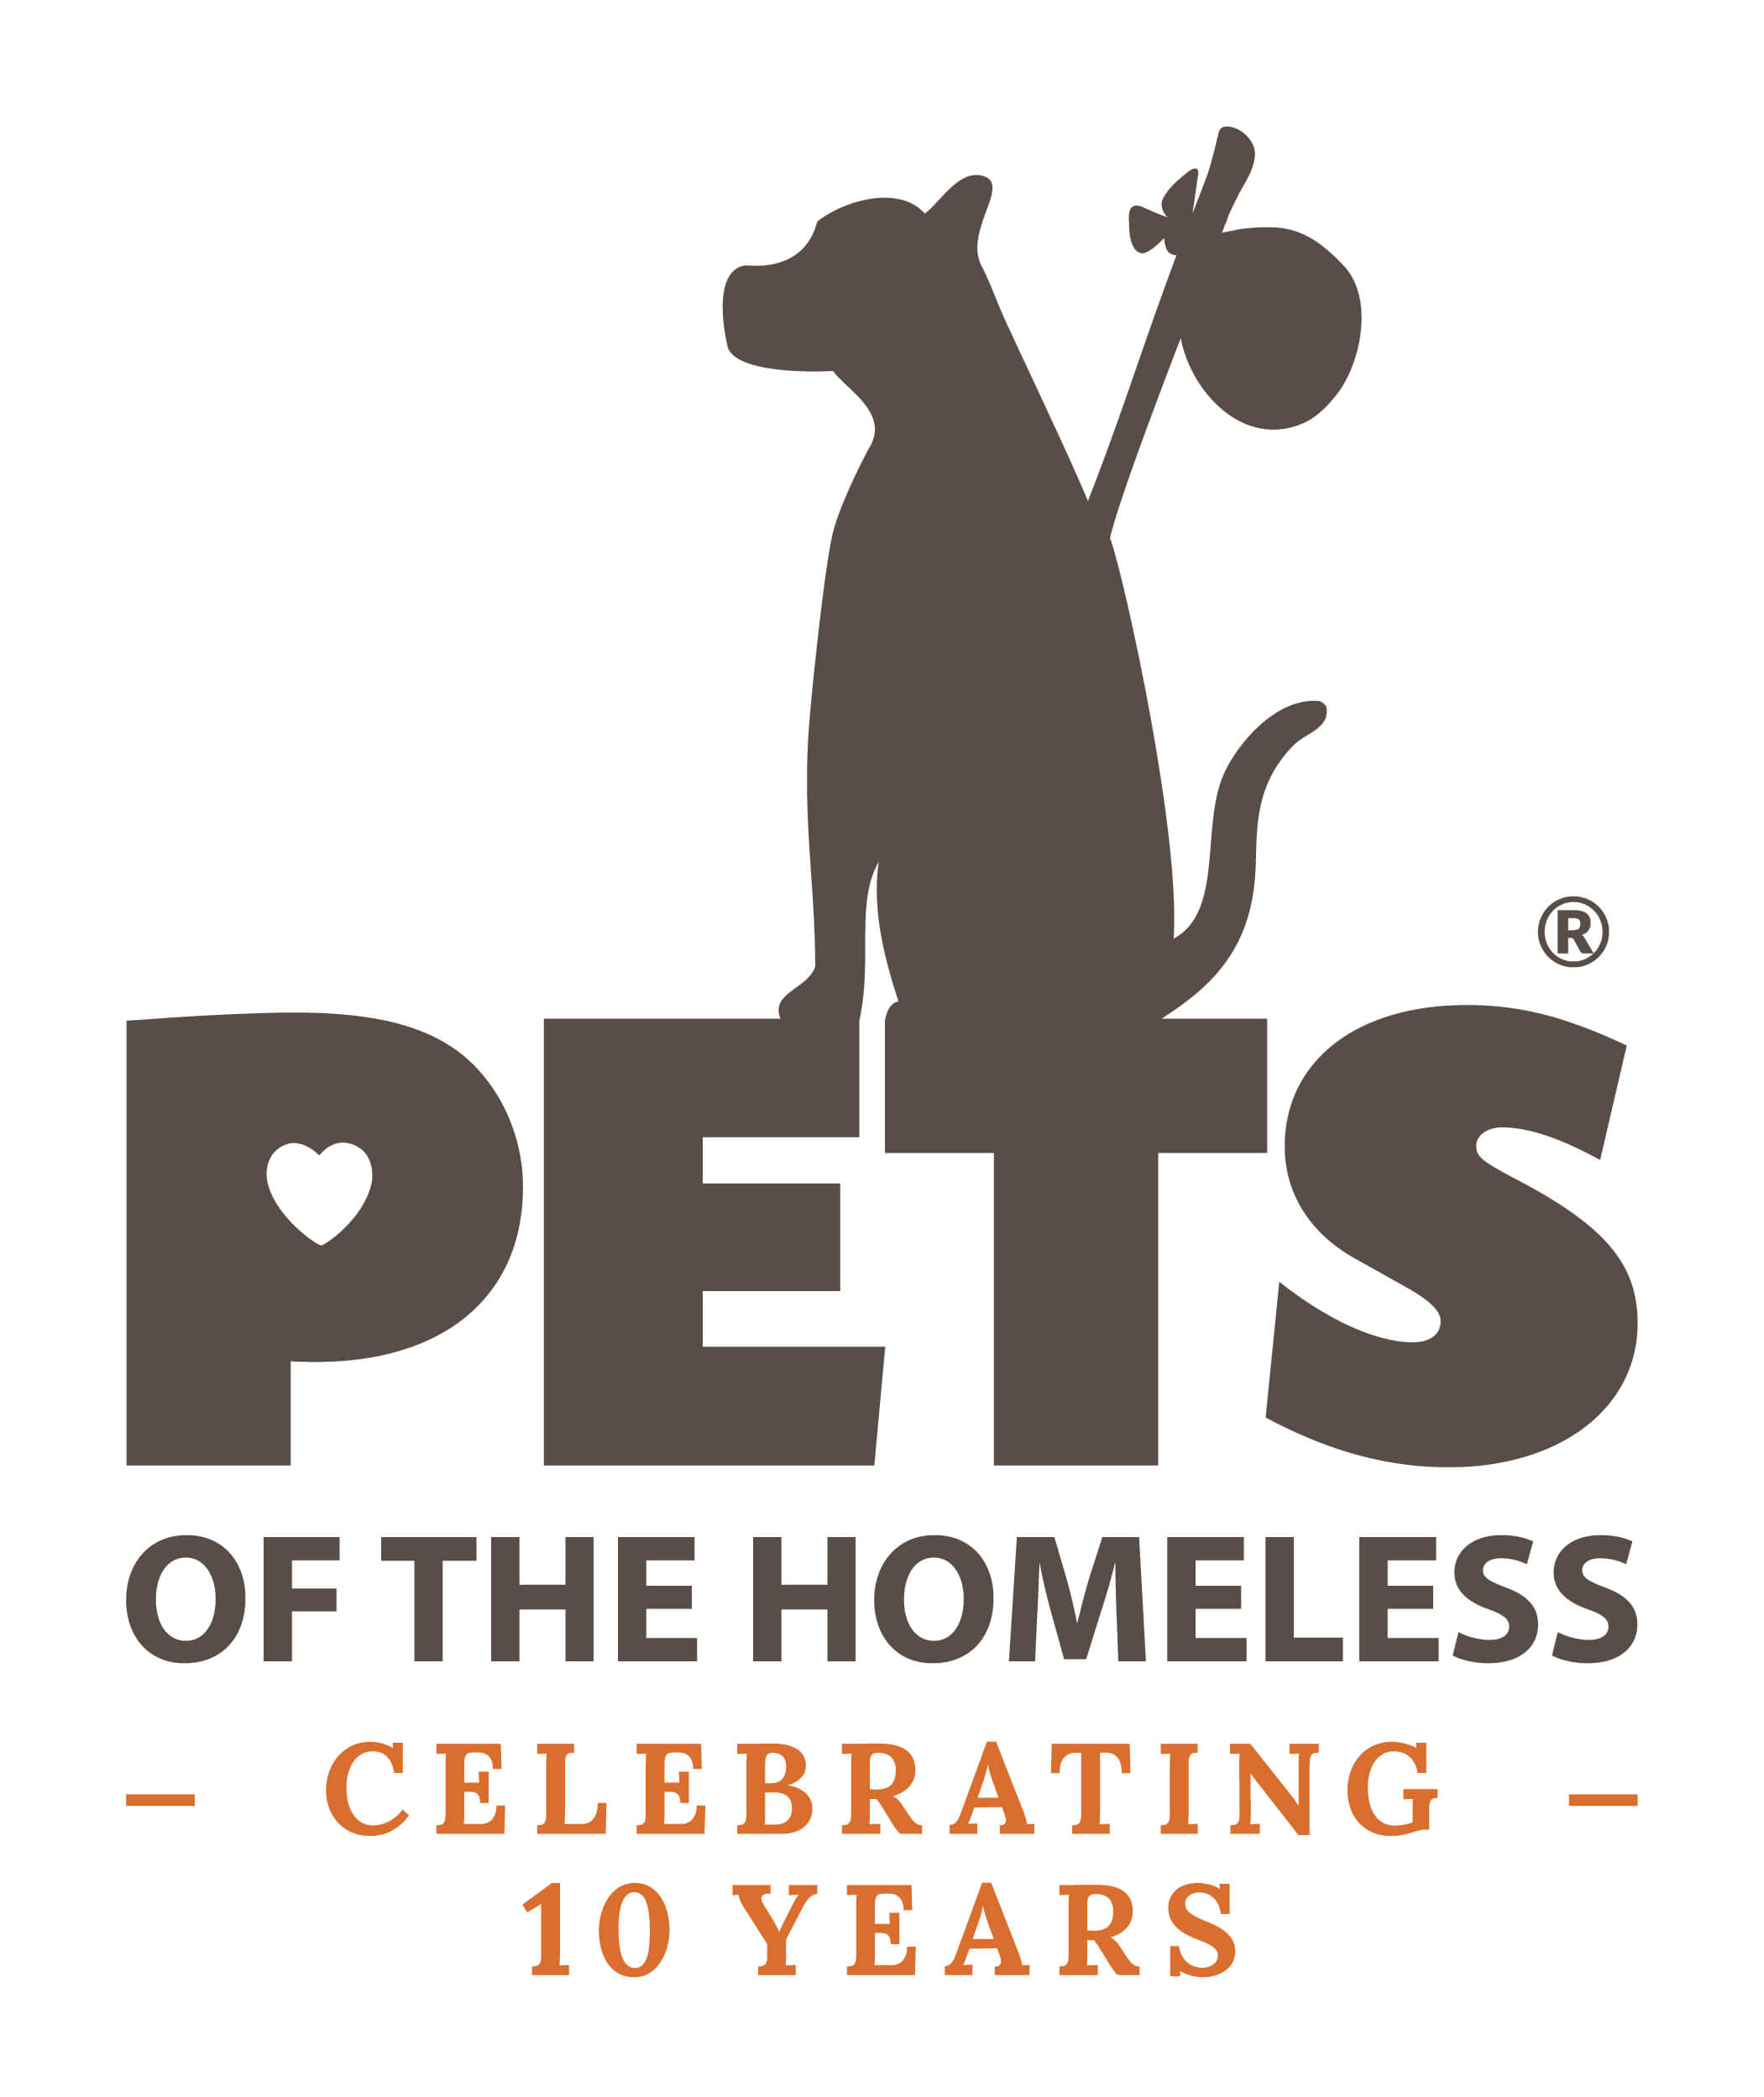 Homeless Logo - Pets of the Homeless Provides Free Collapsible Sleeping Crates